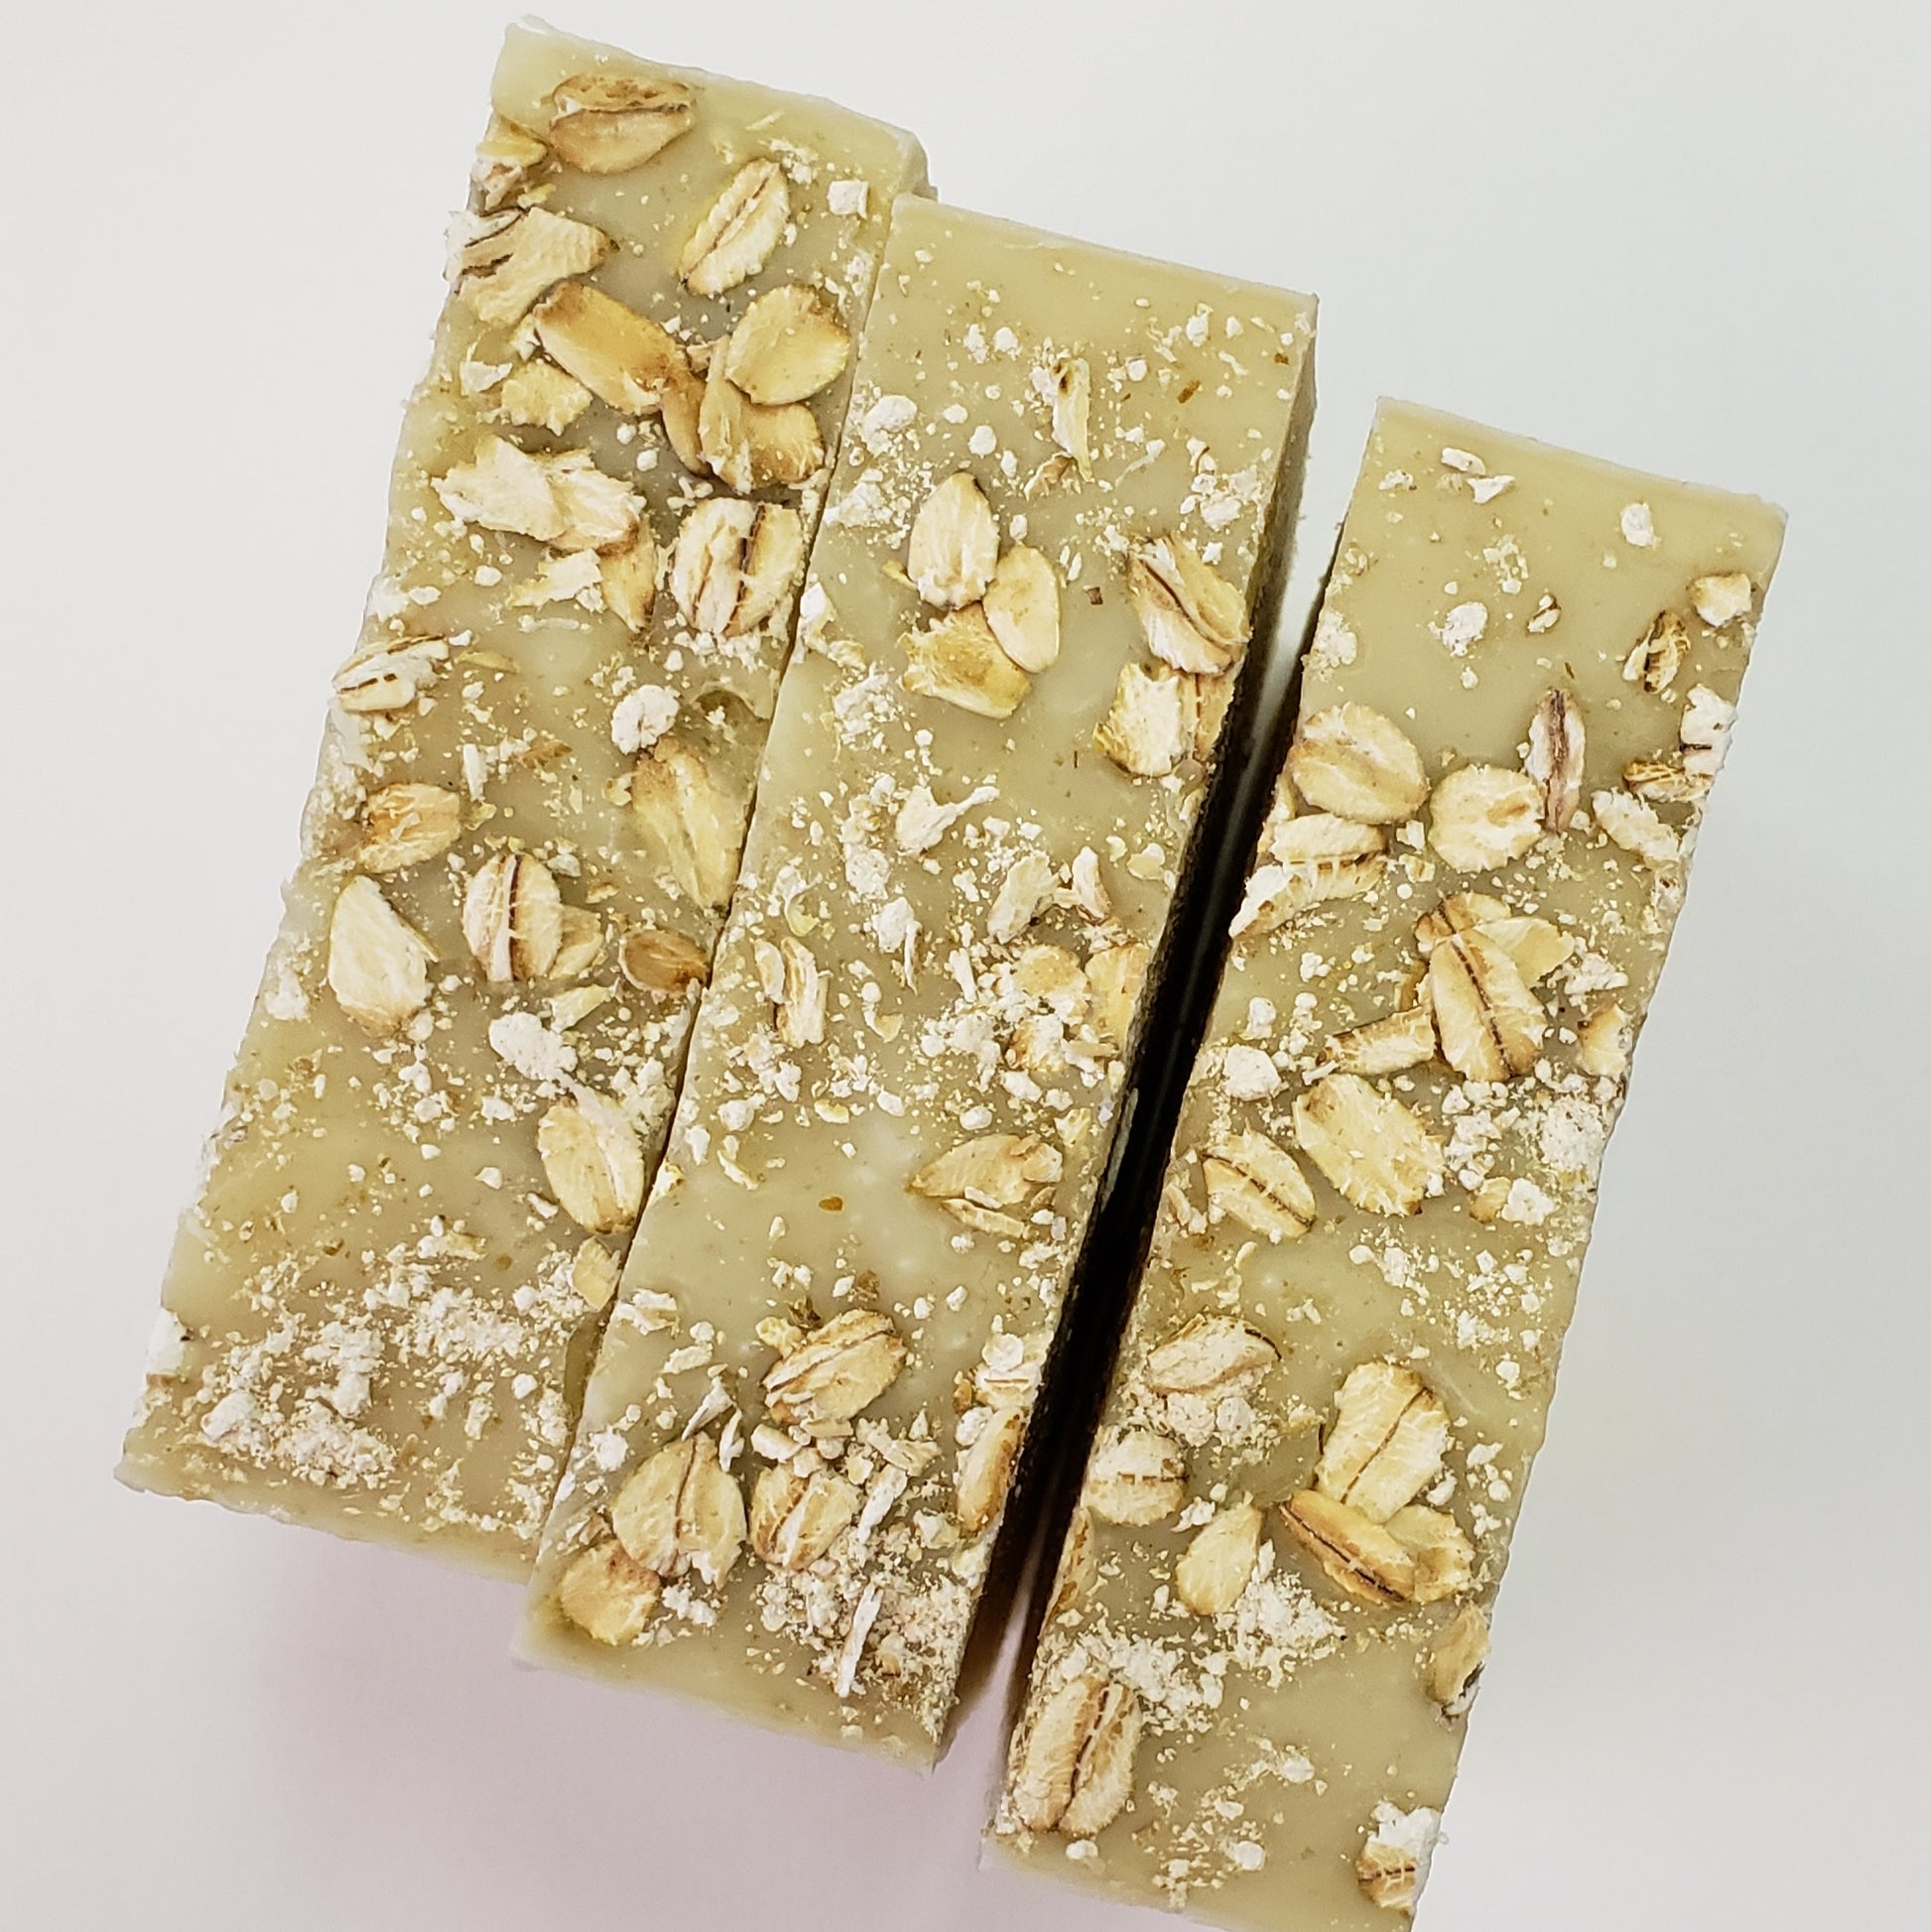 Oatmeal soothing soap - CakeFaceSoaping